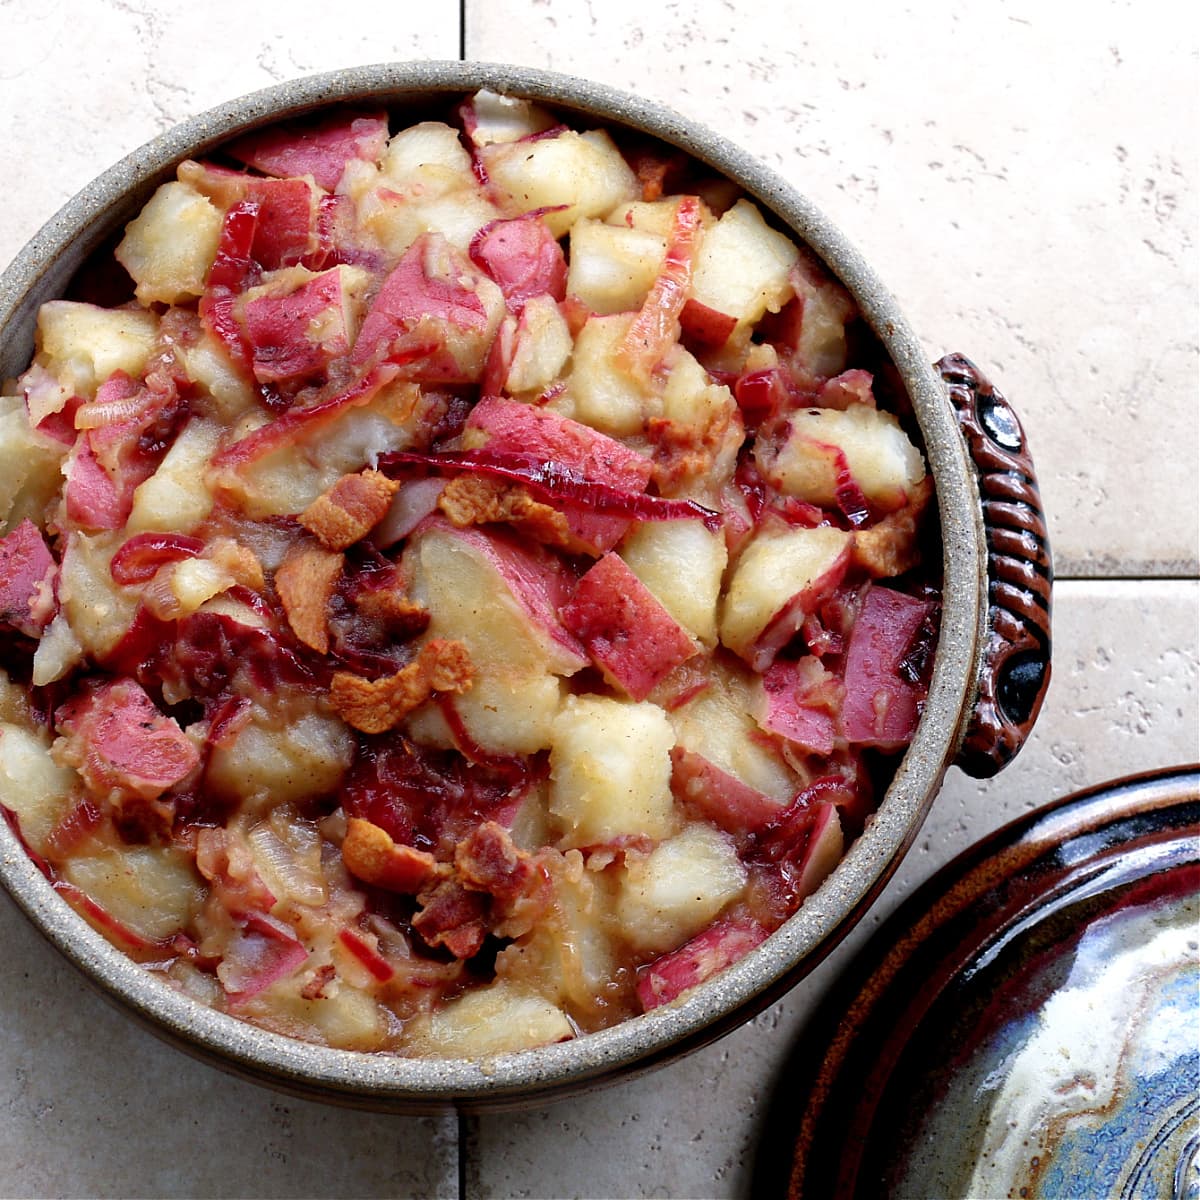 Red potatoes, red onions, bacon and other ingredients in a crockery casserole dish. 